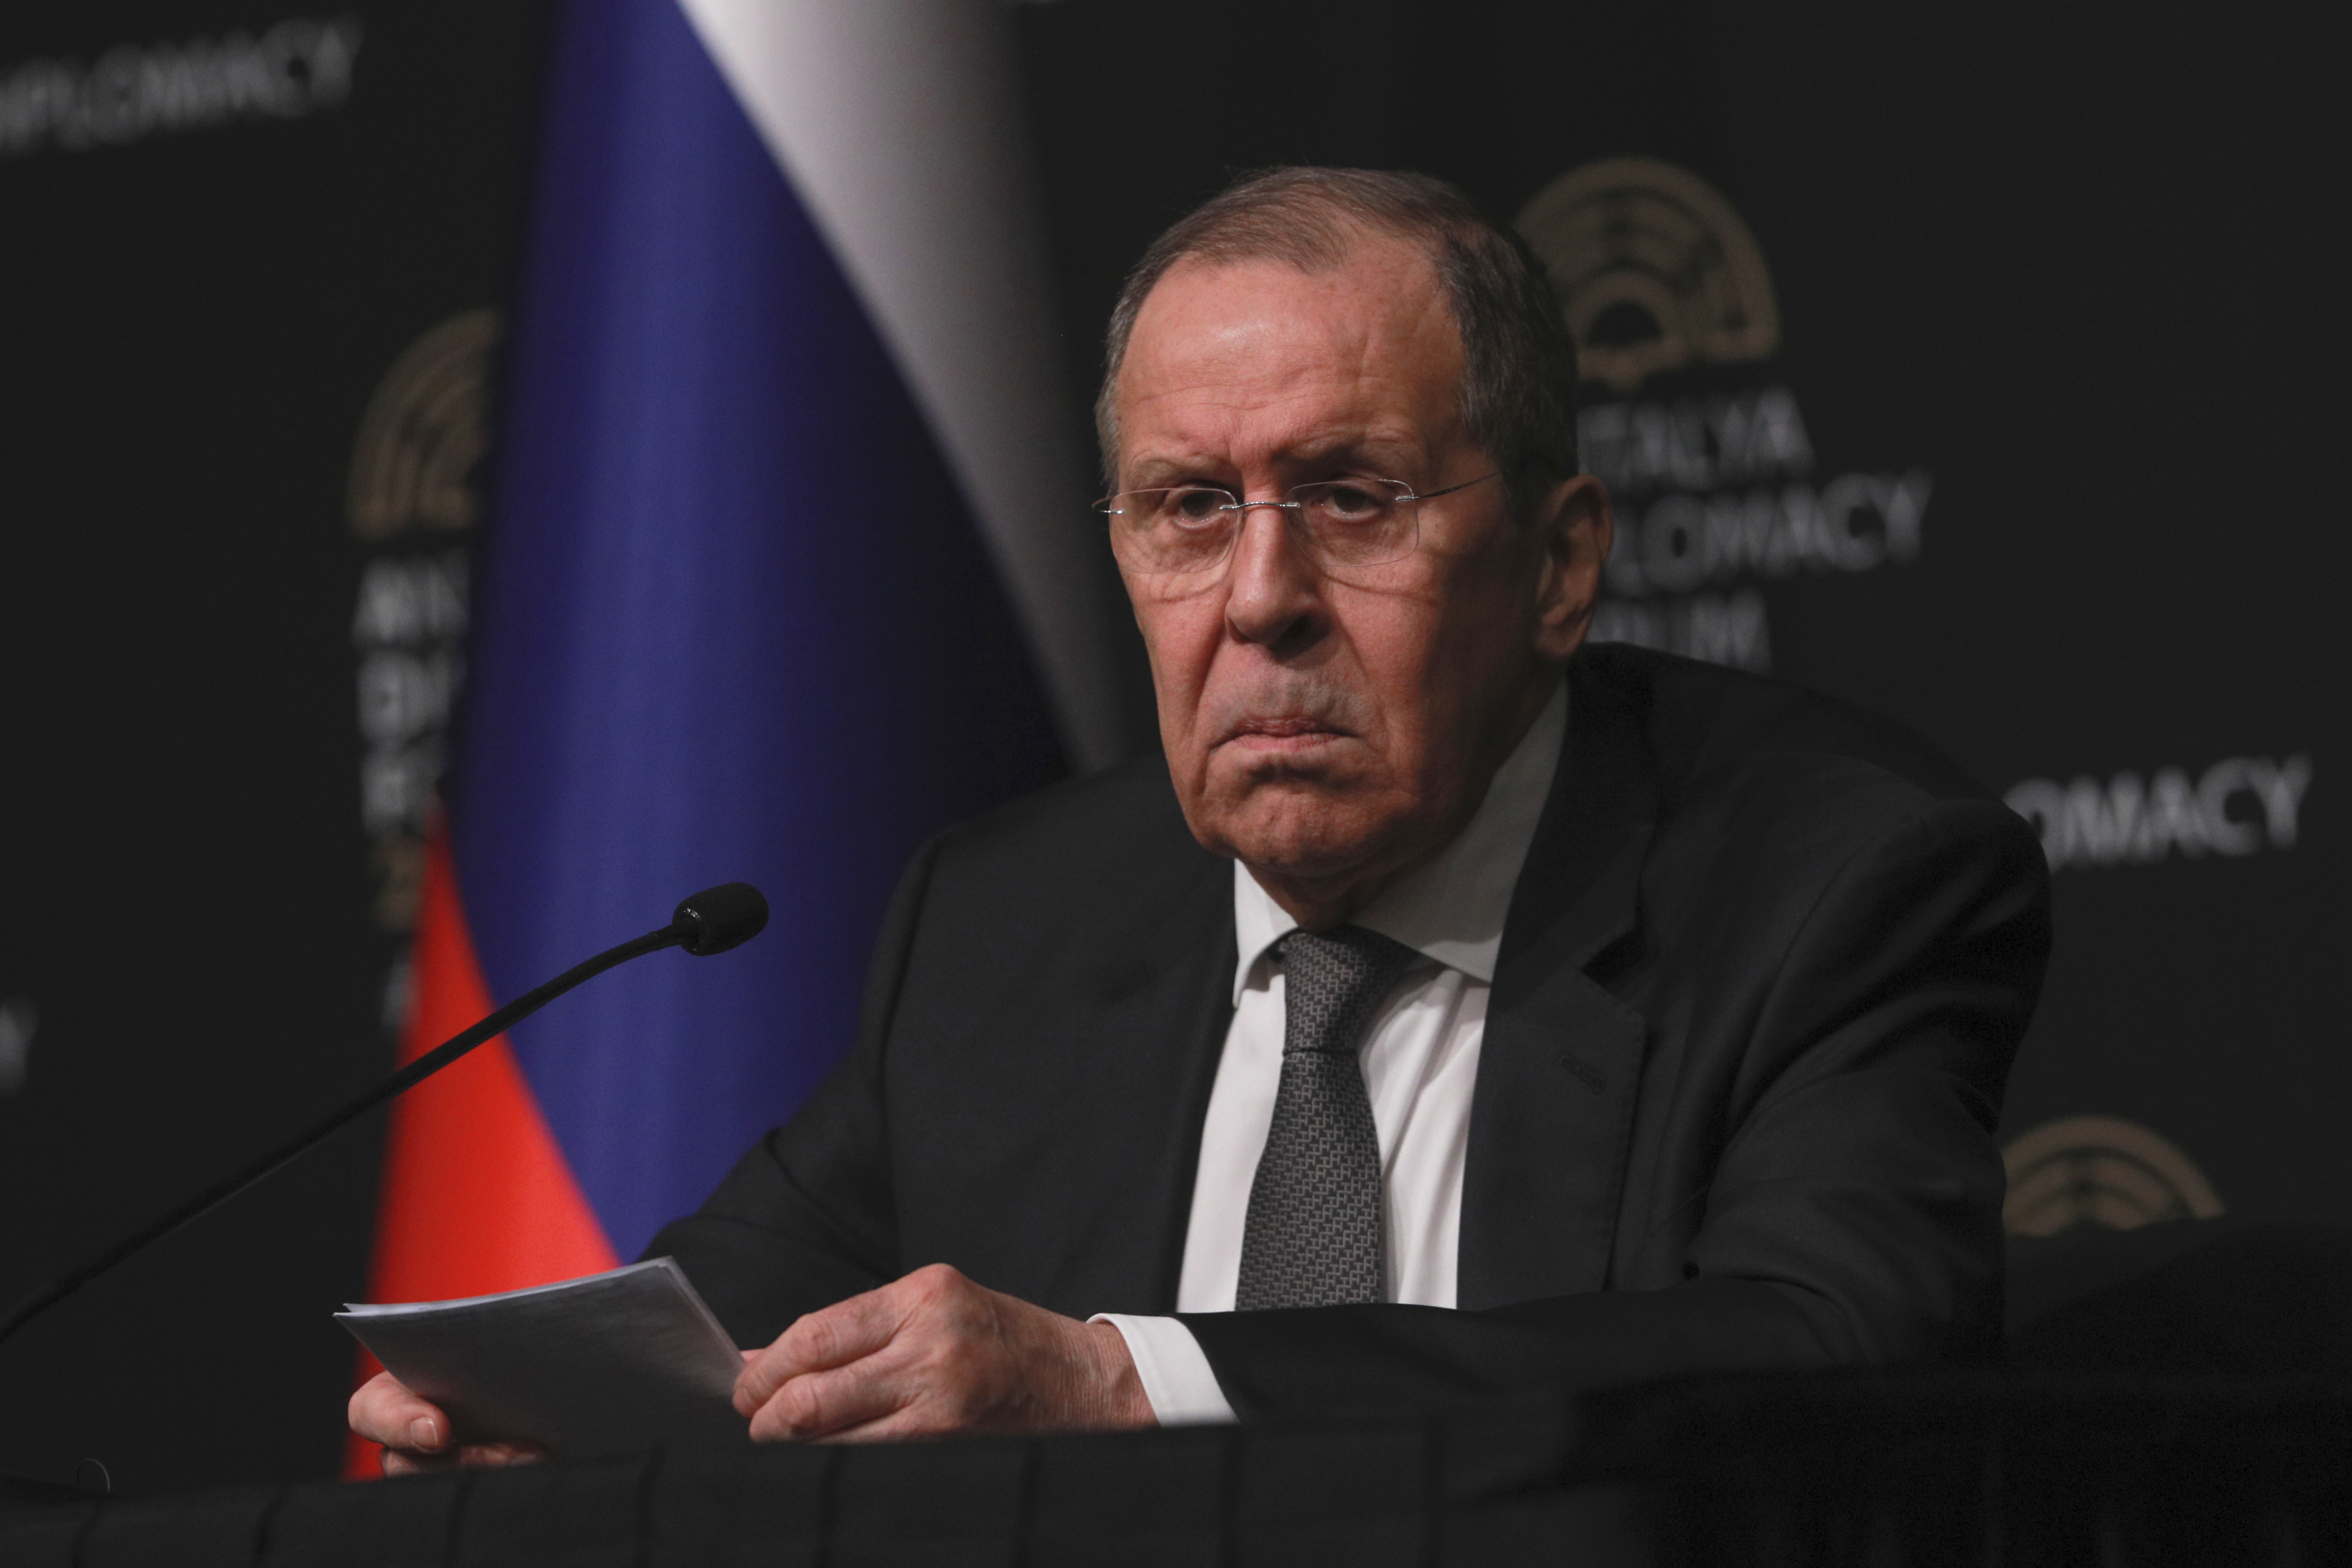 Russia's Foreign Minister Sergey Lavrov talks to journalists during a news conference following a tripartite meeting with the Turkish and Ukraine Foreign Ministers in Antalya, Turkey, on March 10.